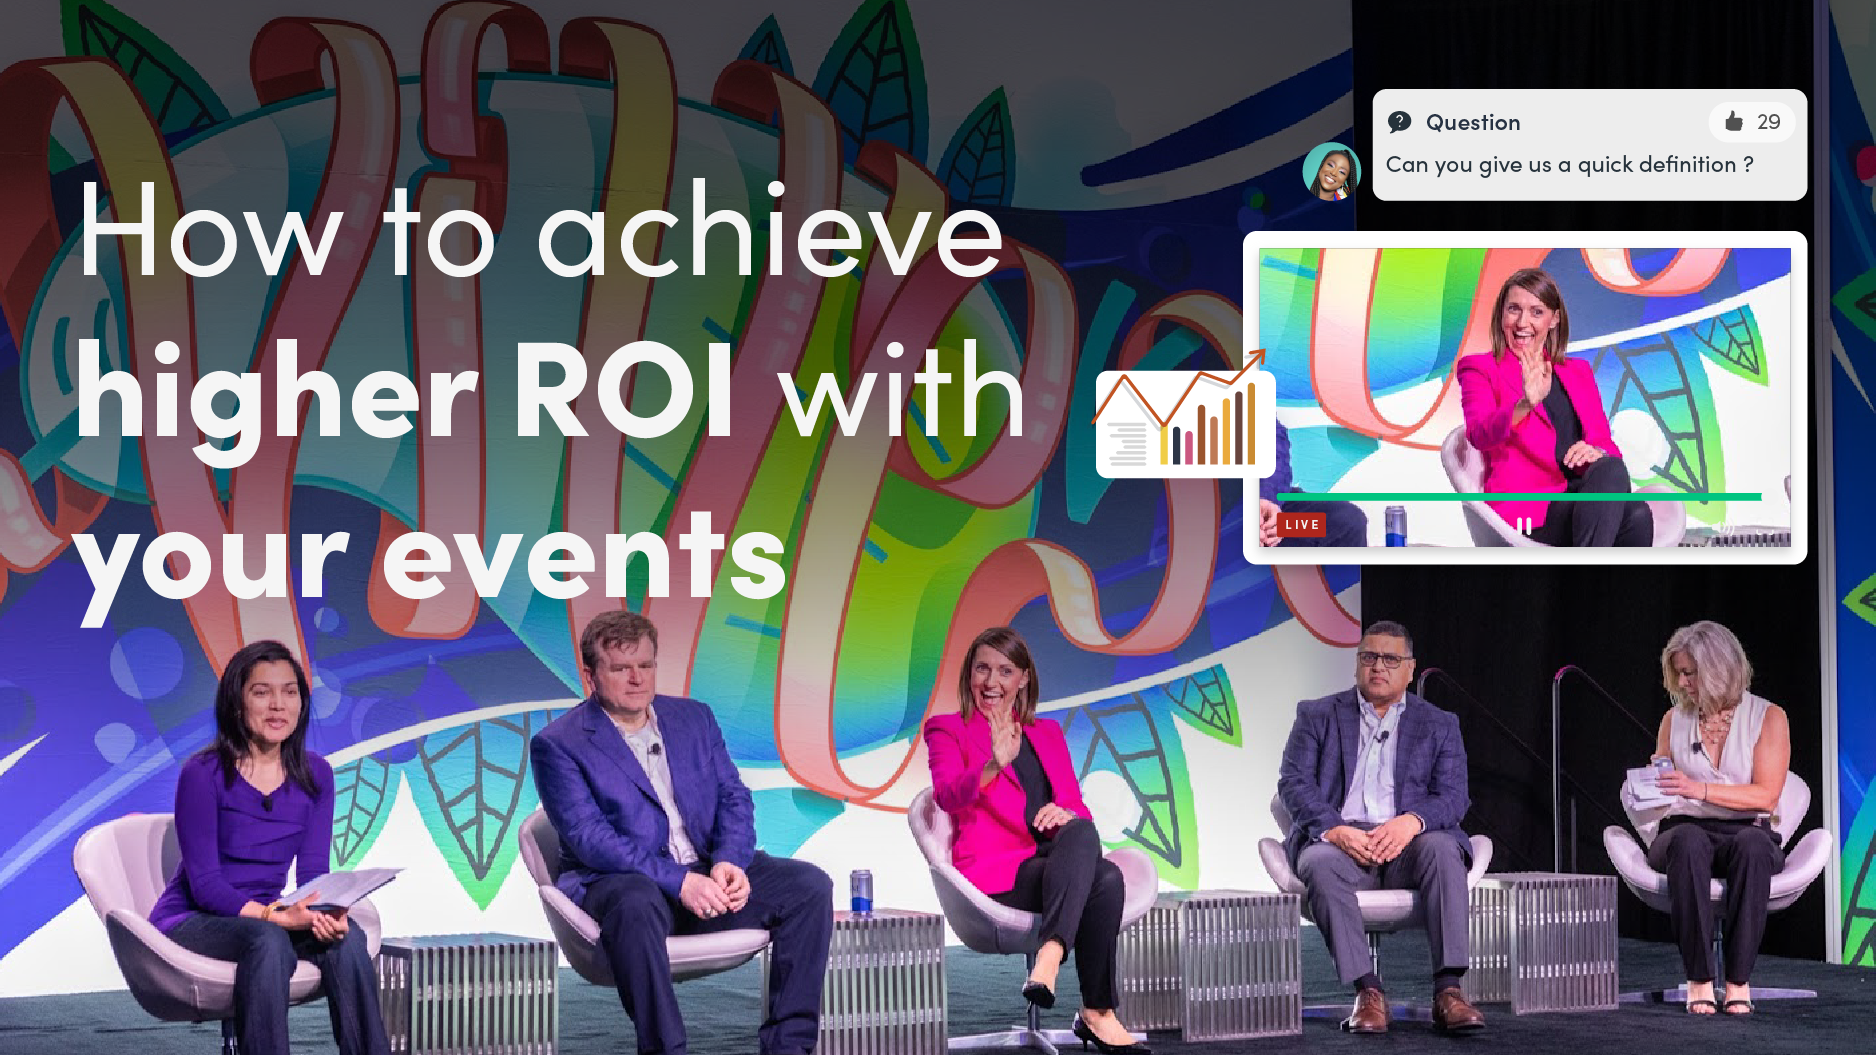 How to achieve higher ROI with your events